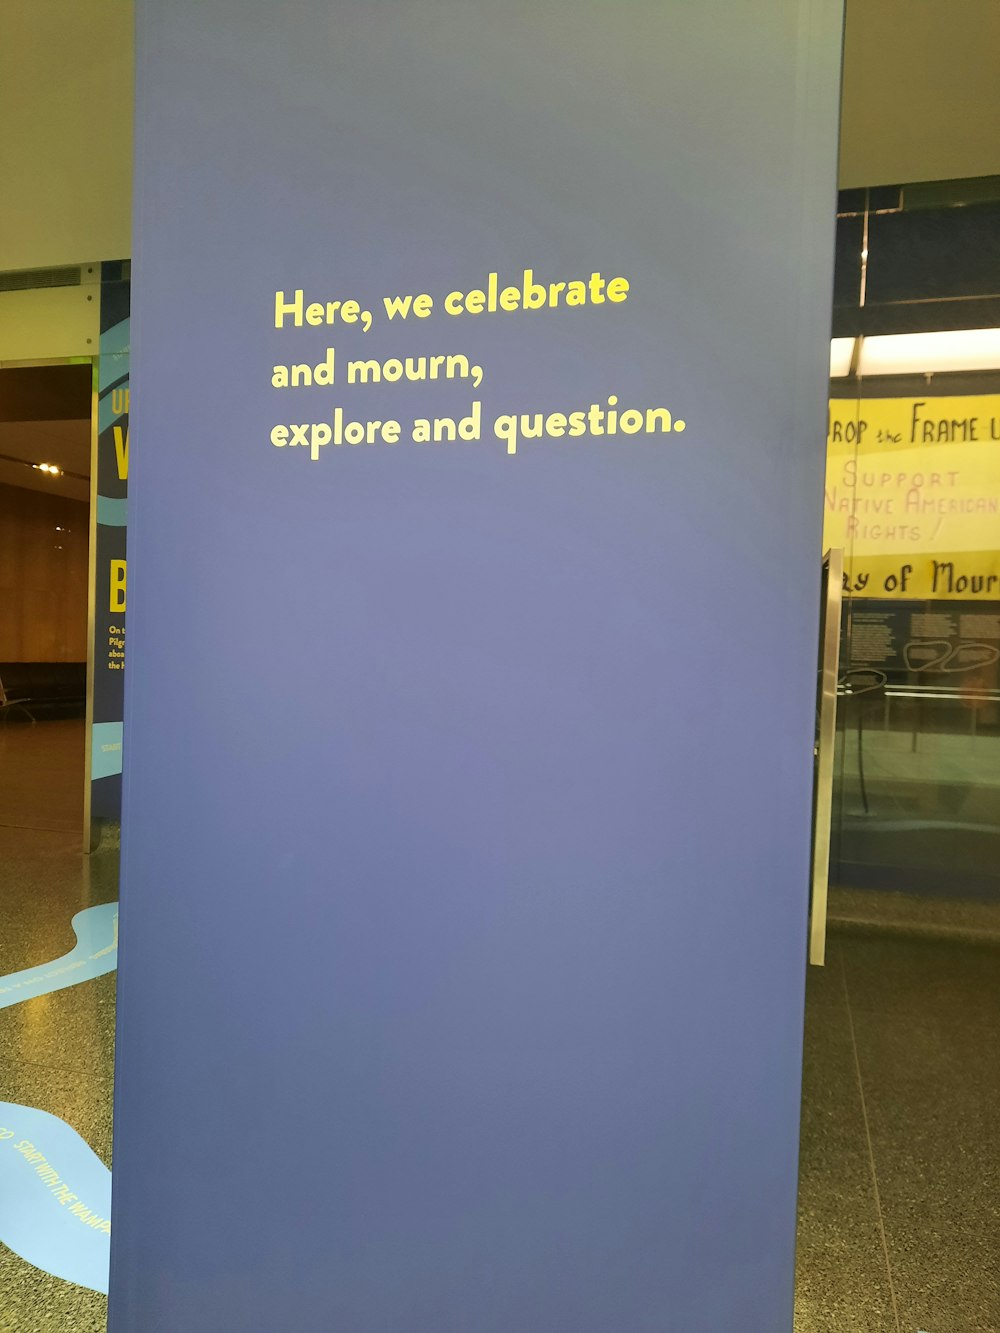 a blue sign that says here, we celebrate and mount, explore and question